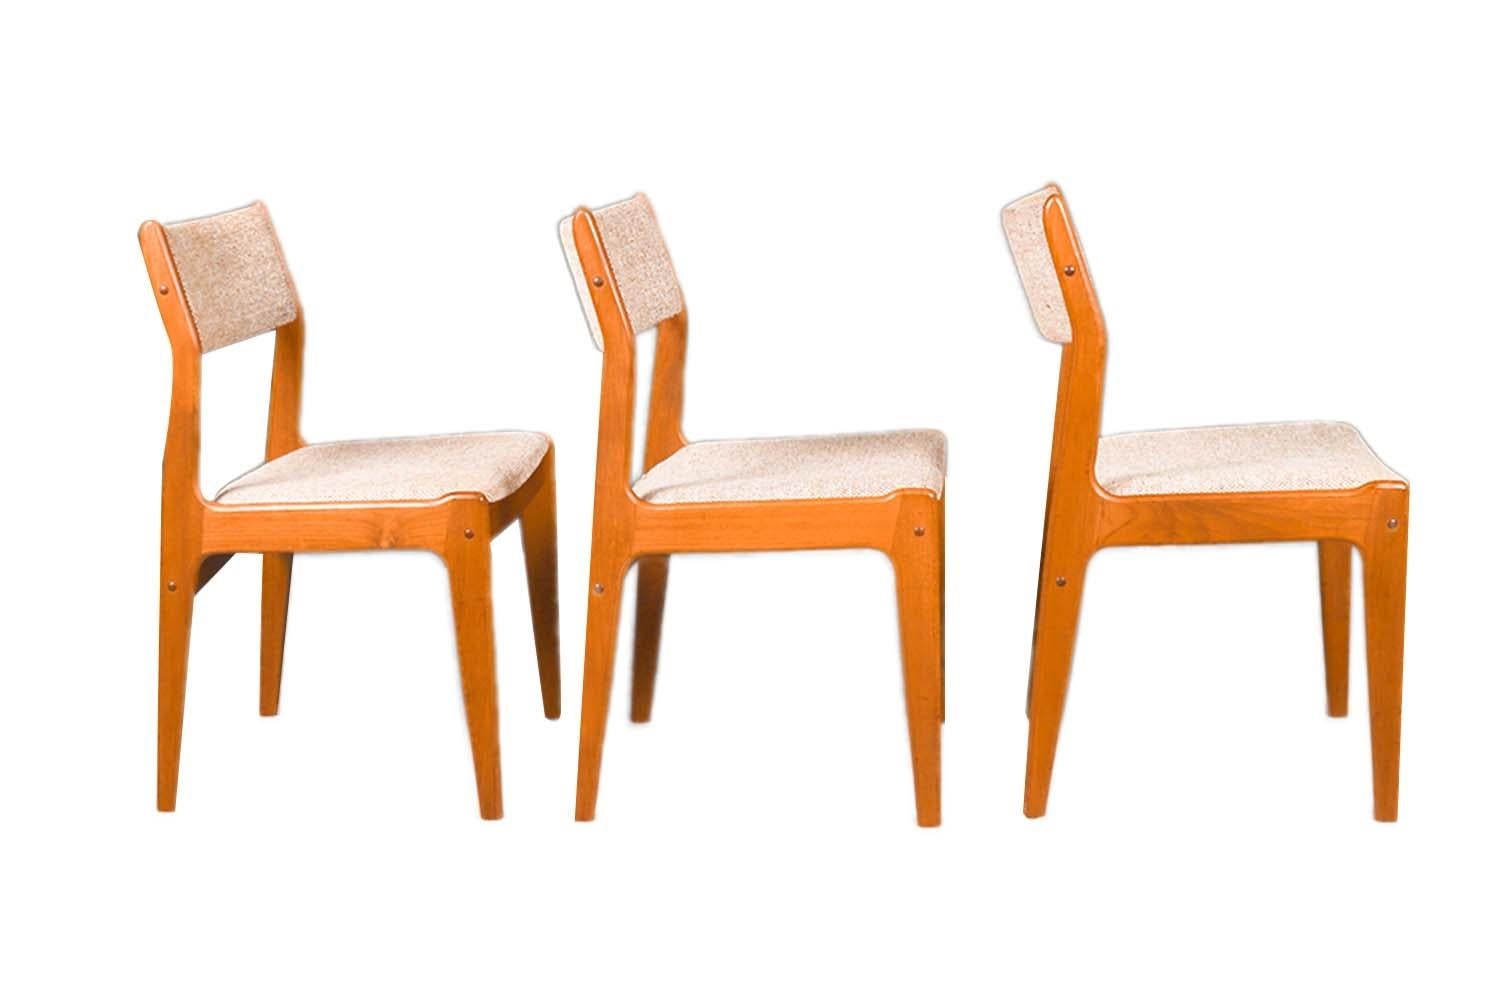 Singaporean Midcentury Teak Dining Chairs Scandinavia Woodworks Co. For Sale